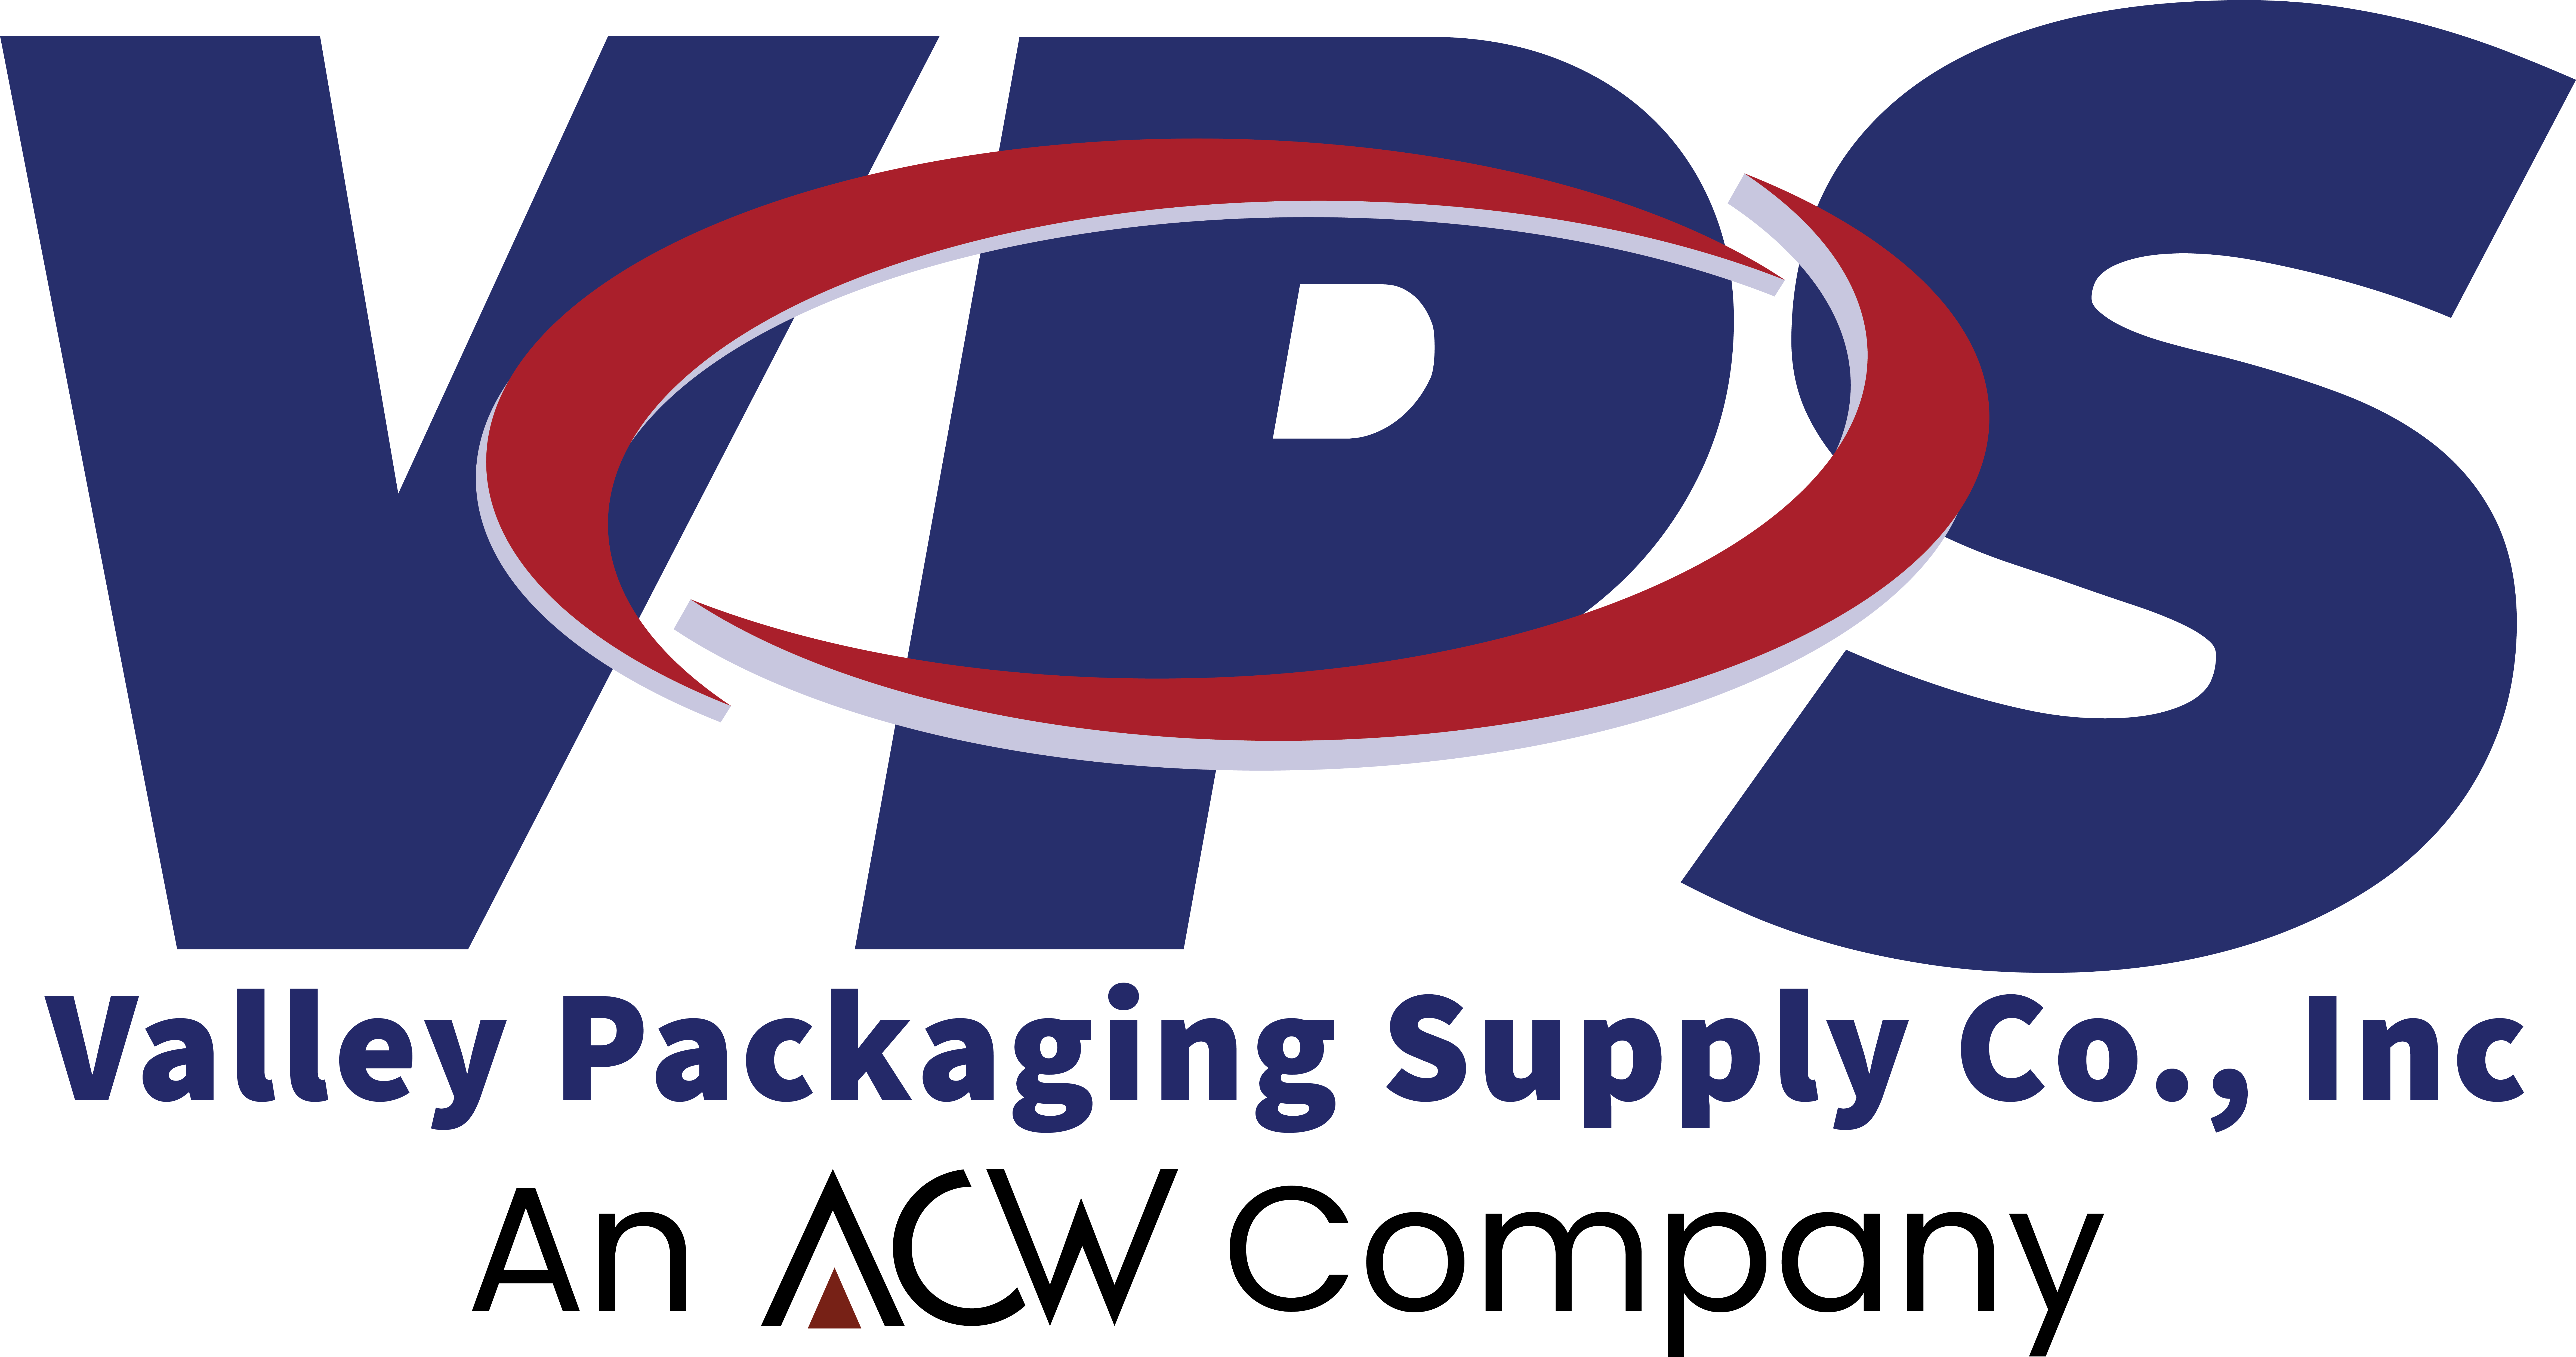 Valley Packaging Supply